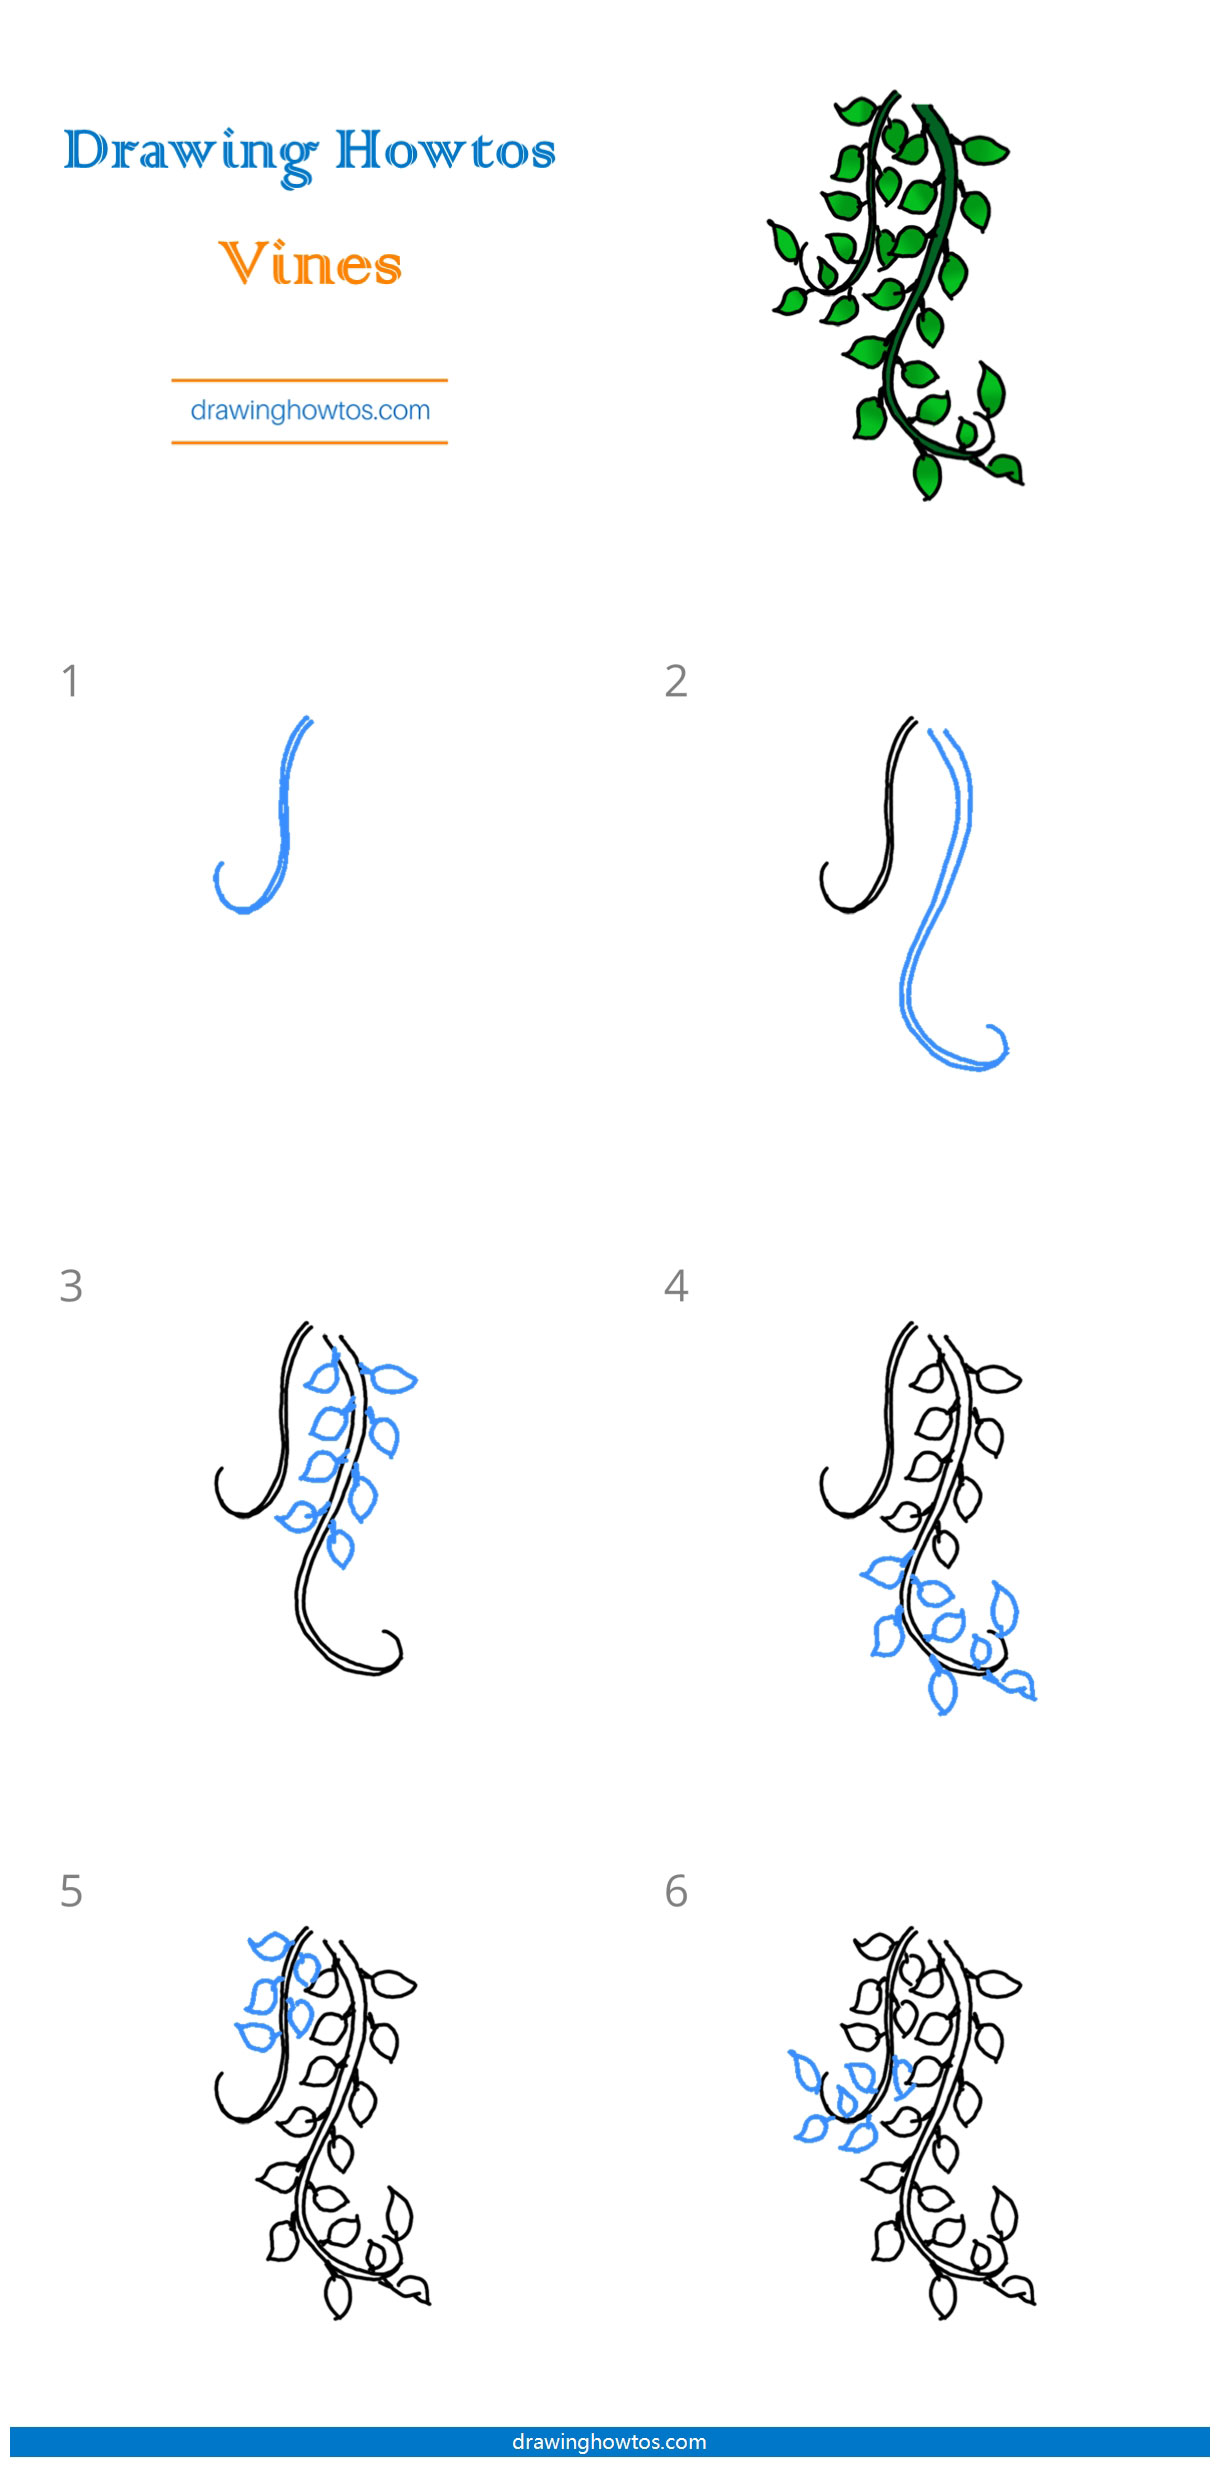 How to Draw Vines Step by Step Easy Drawing Guides Drawing Howtos